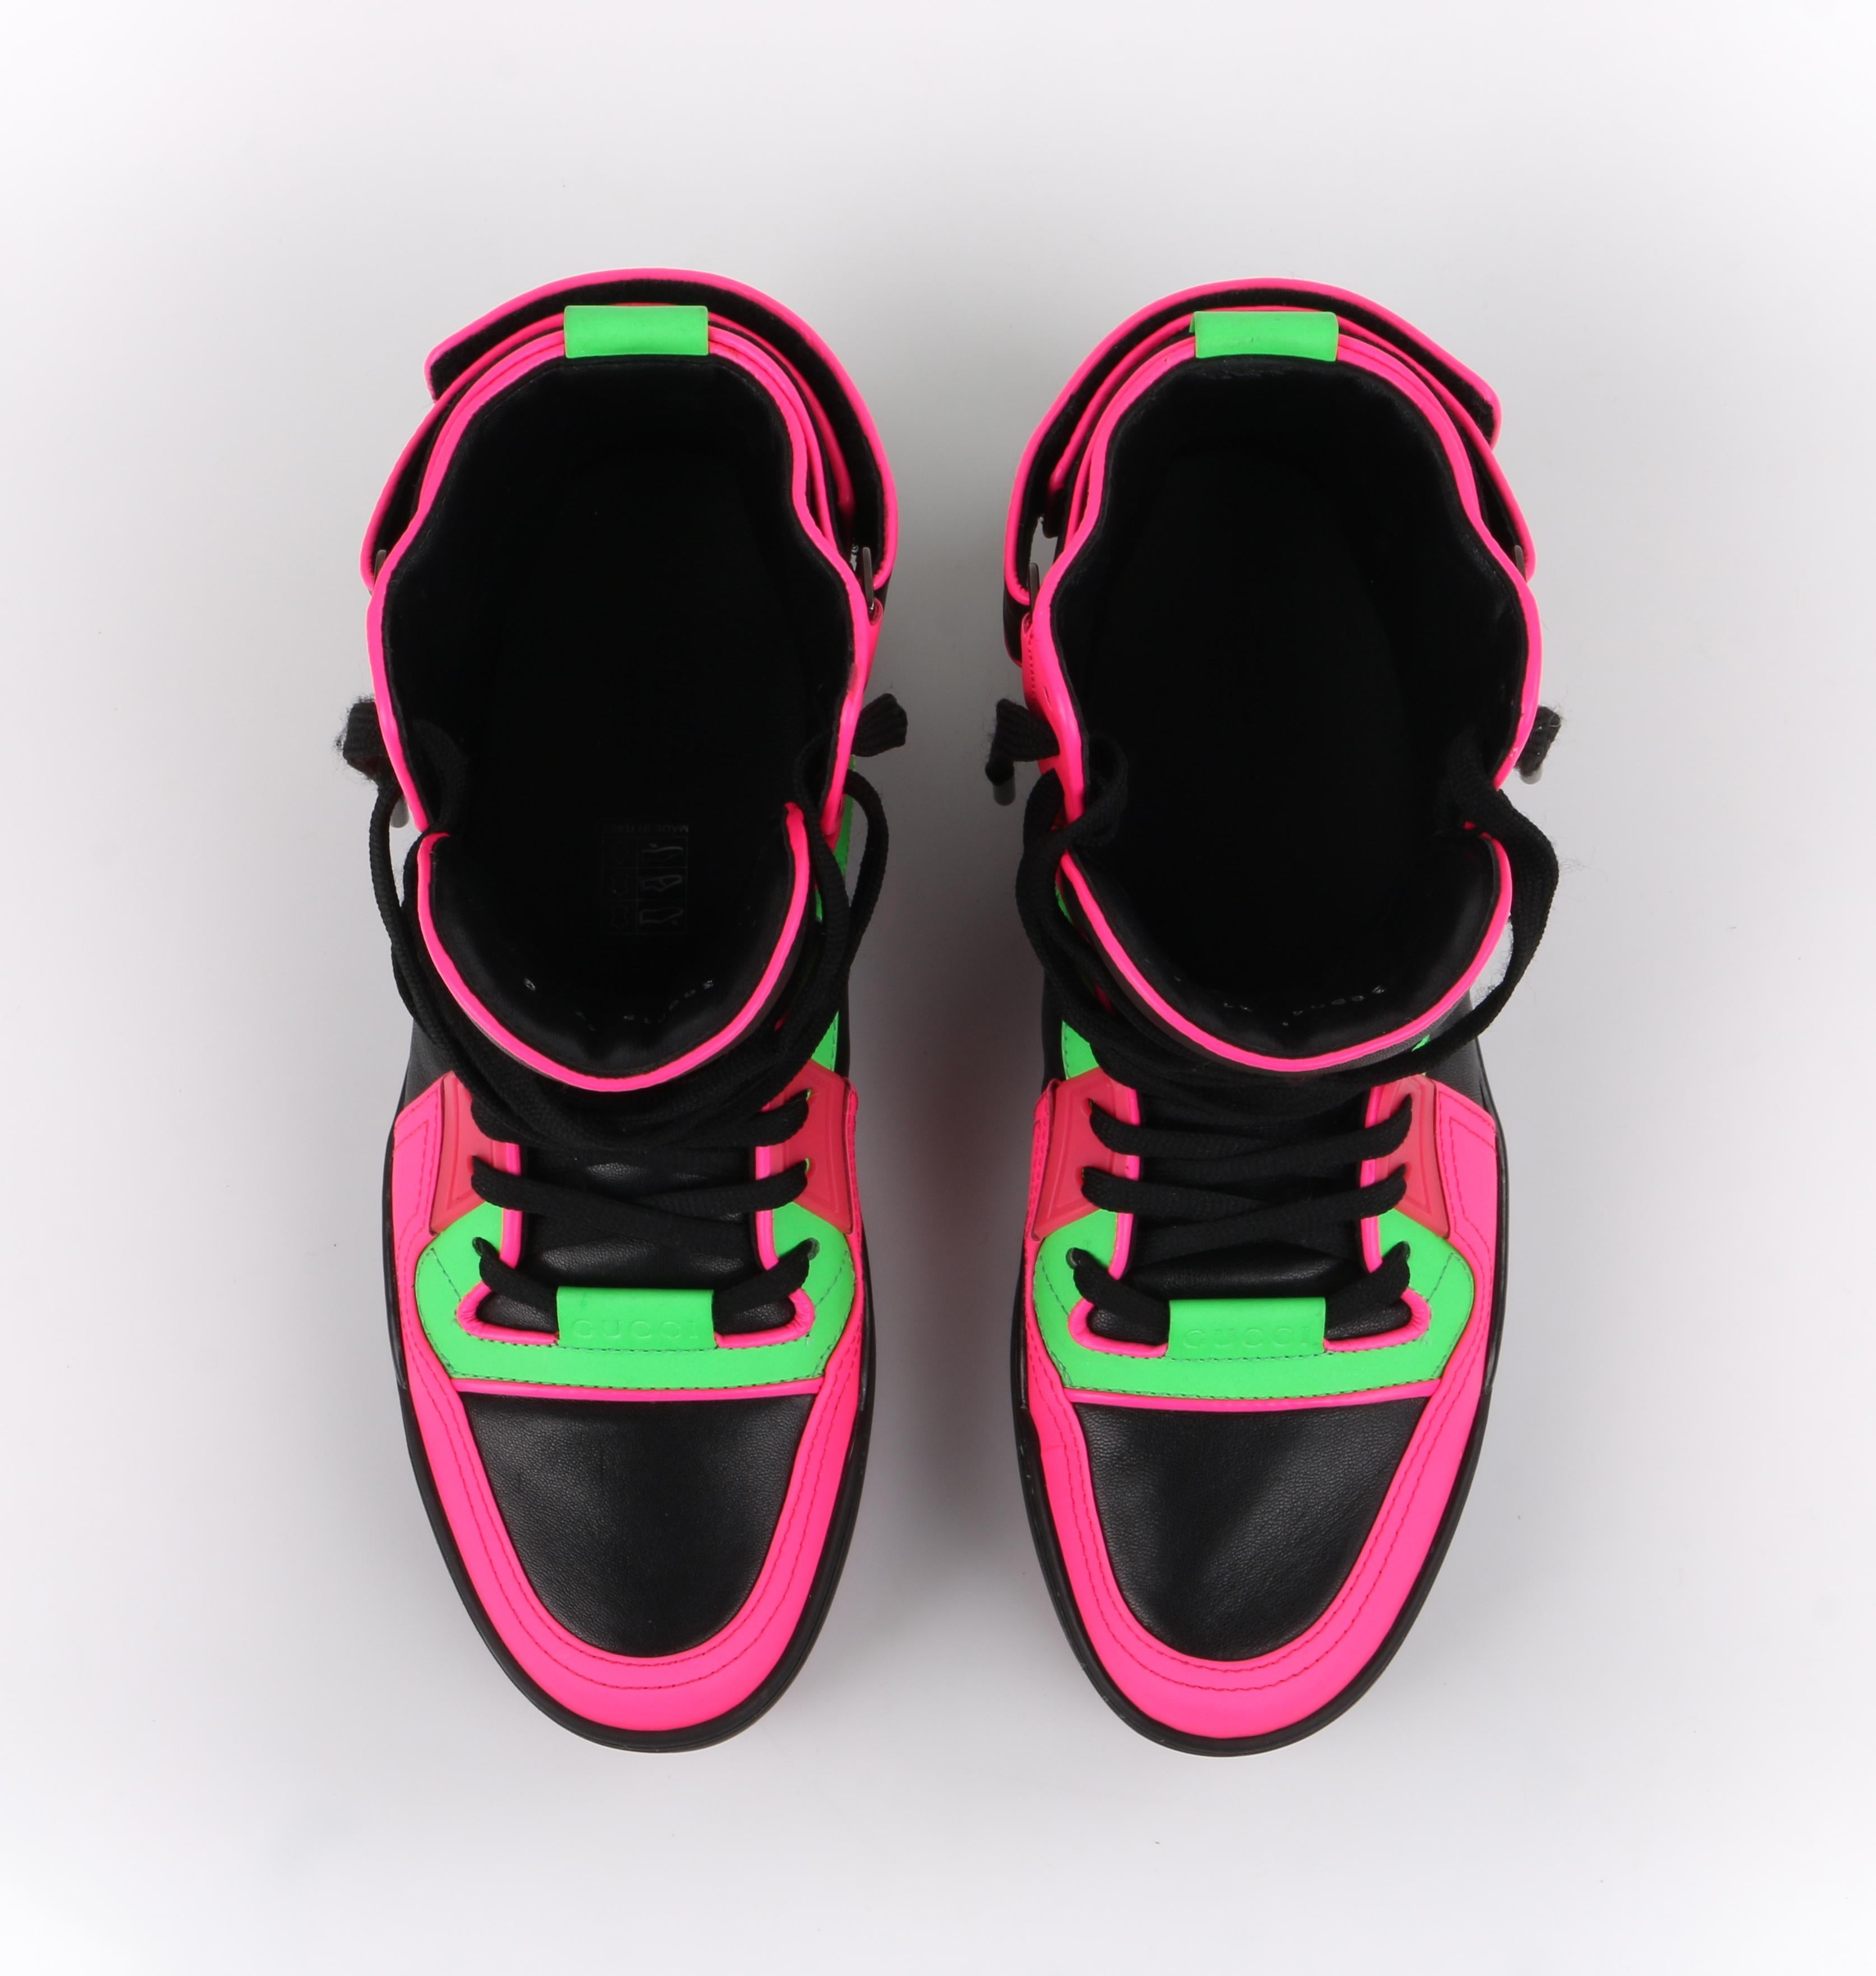 GUCCI Black Neon Green Pink Black Leather High Top Sneakers 1